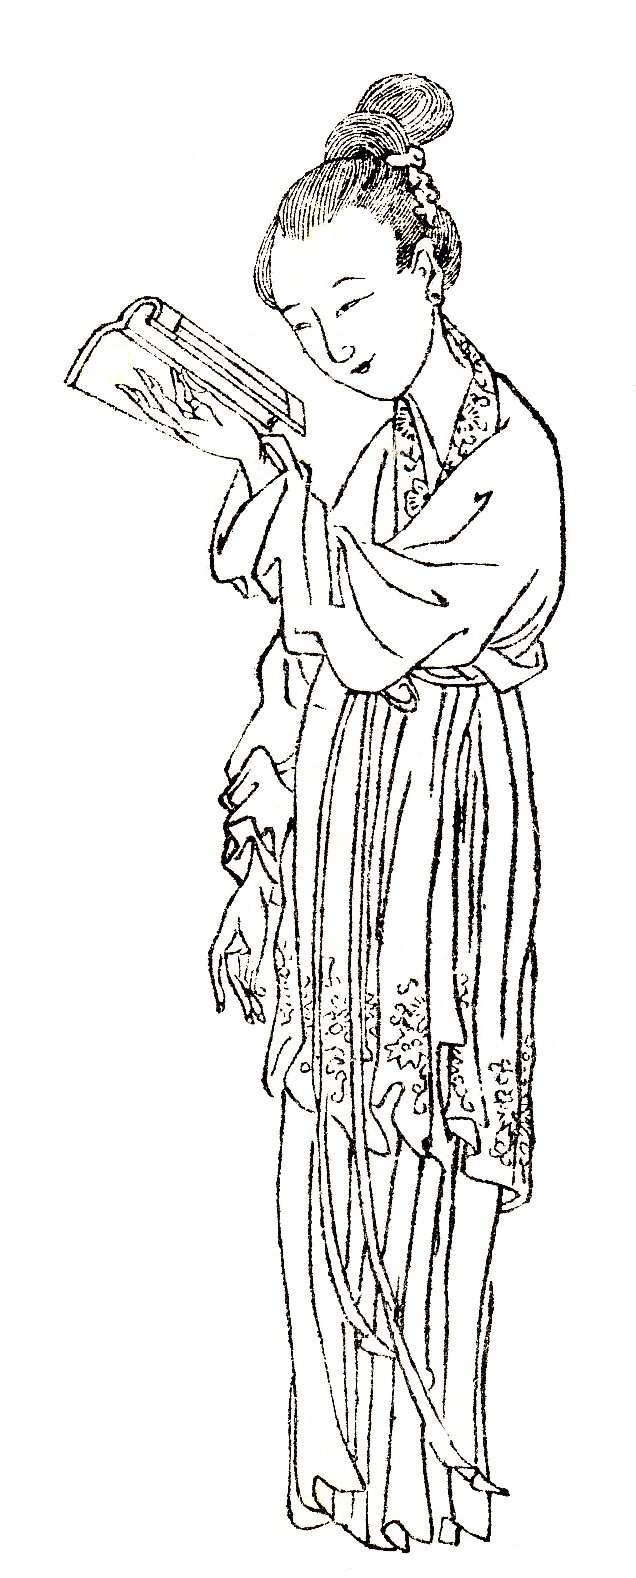 Ban Zhao, courtesy name Huiban, was the first known female Chinese historian.